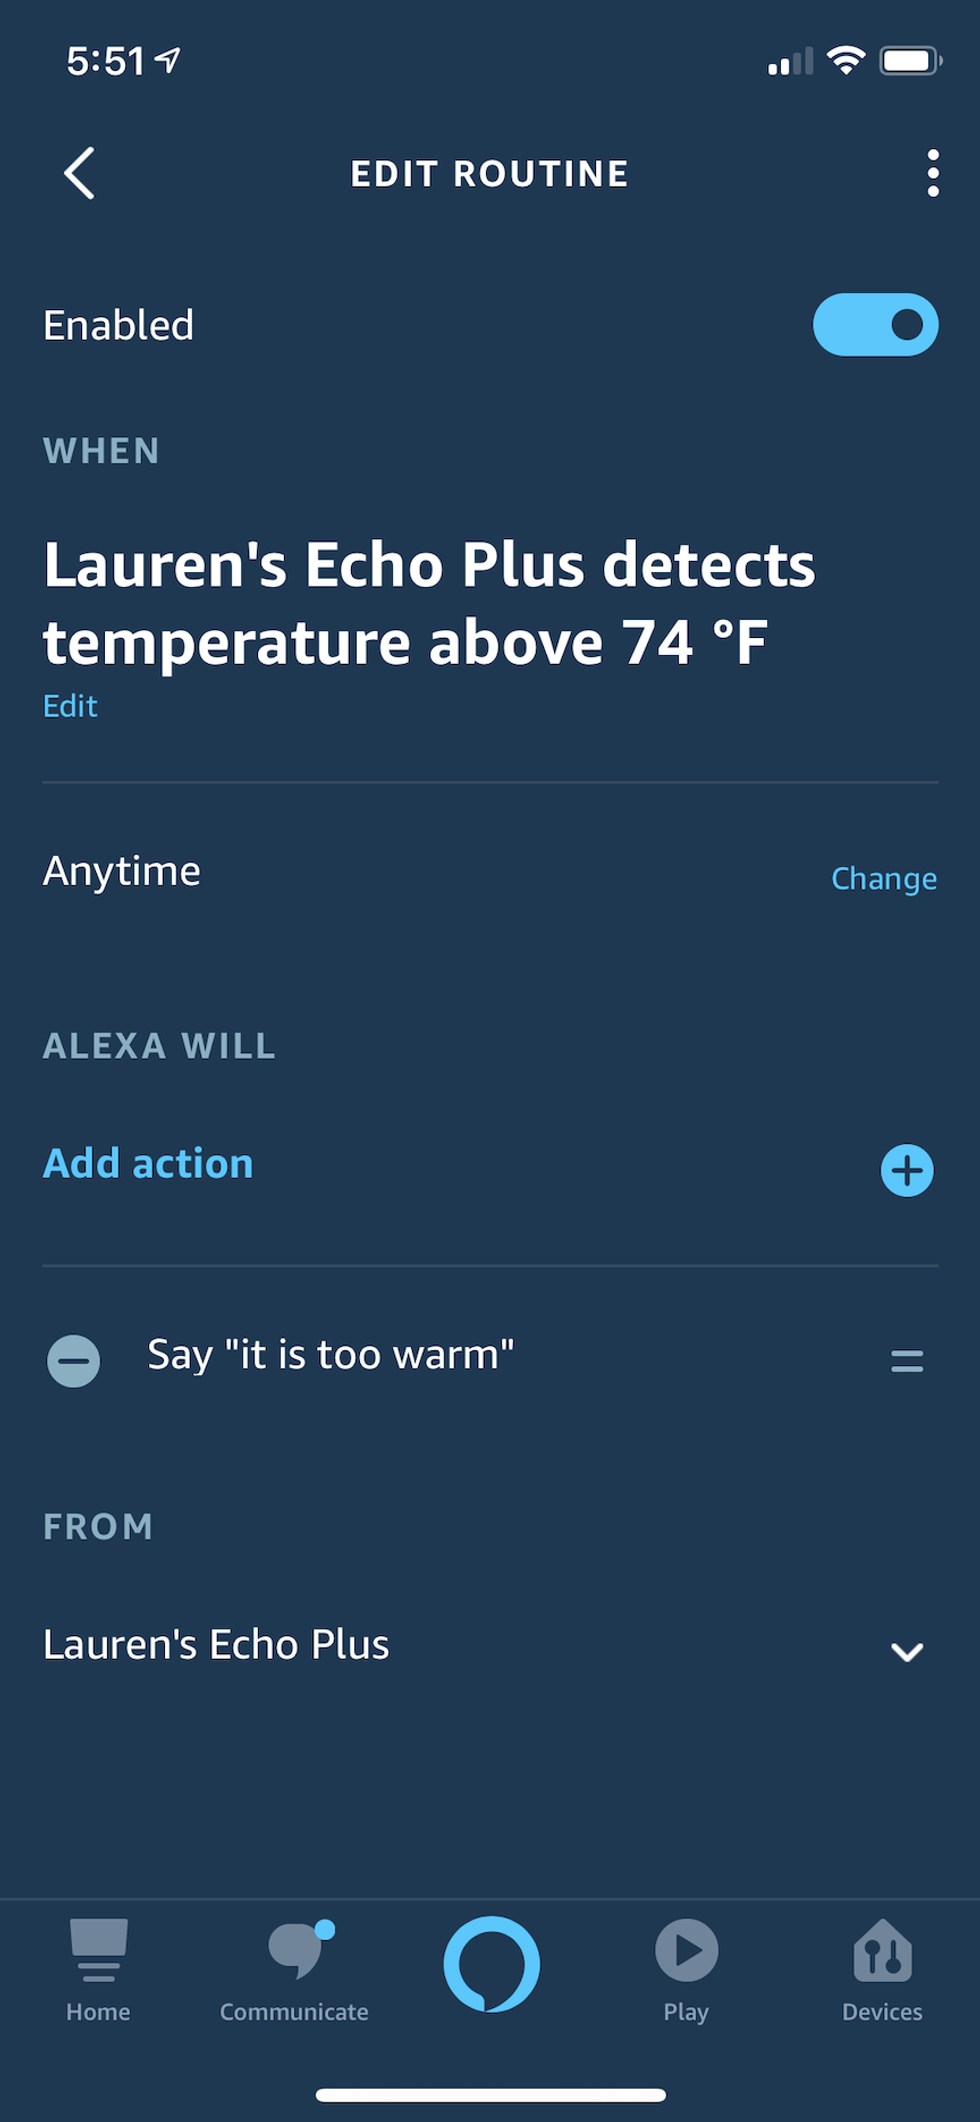 The Alexa Routine tied to the temperature sensor in the Echo Plus never worked